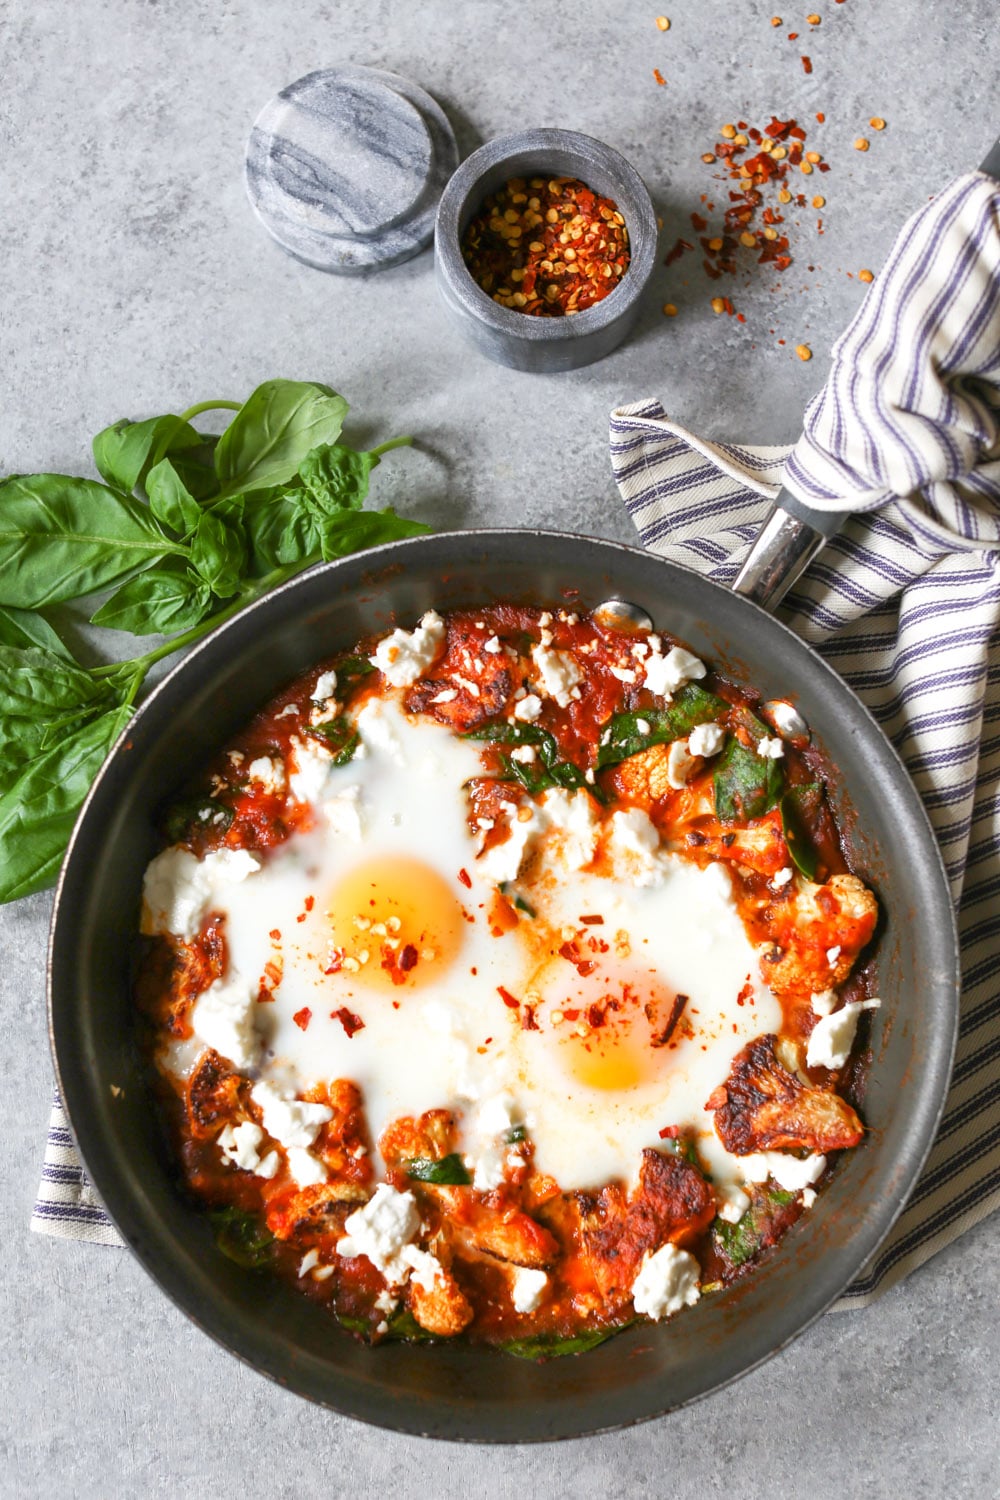 20 Satisfying Vegetarian Recipes- Skillet Eggs with Spinach and Roasted Cauliflower